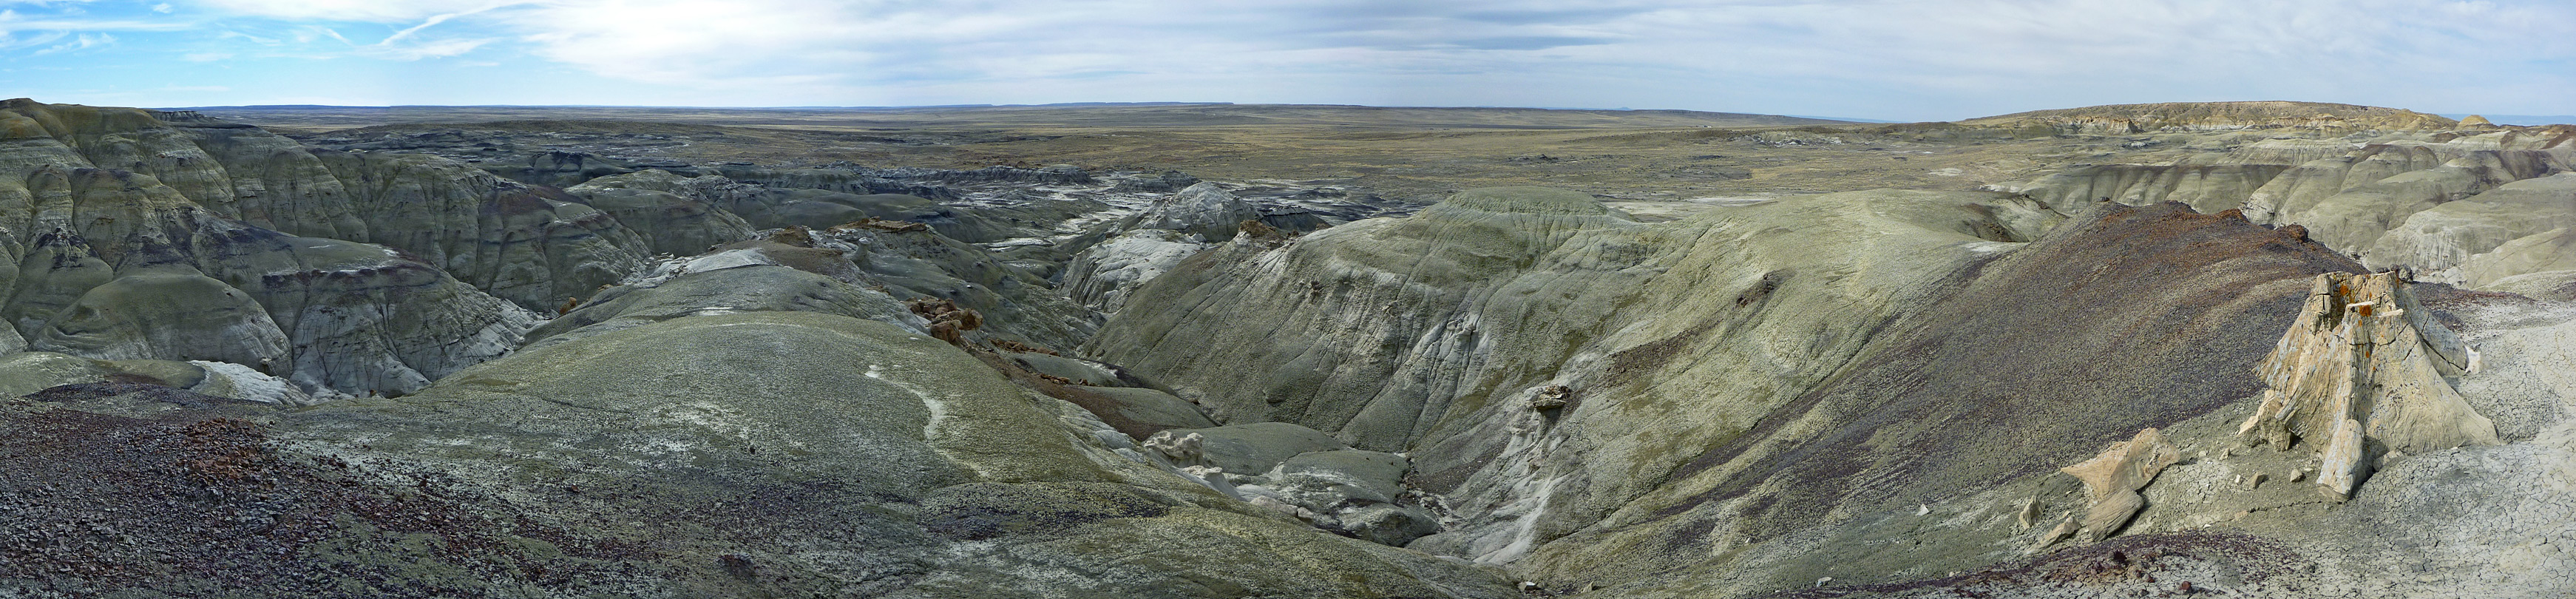 Panorama of the badlands